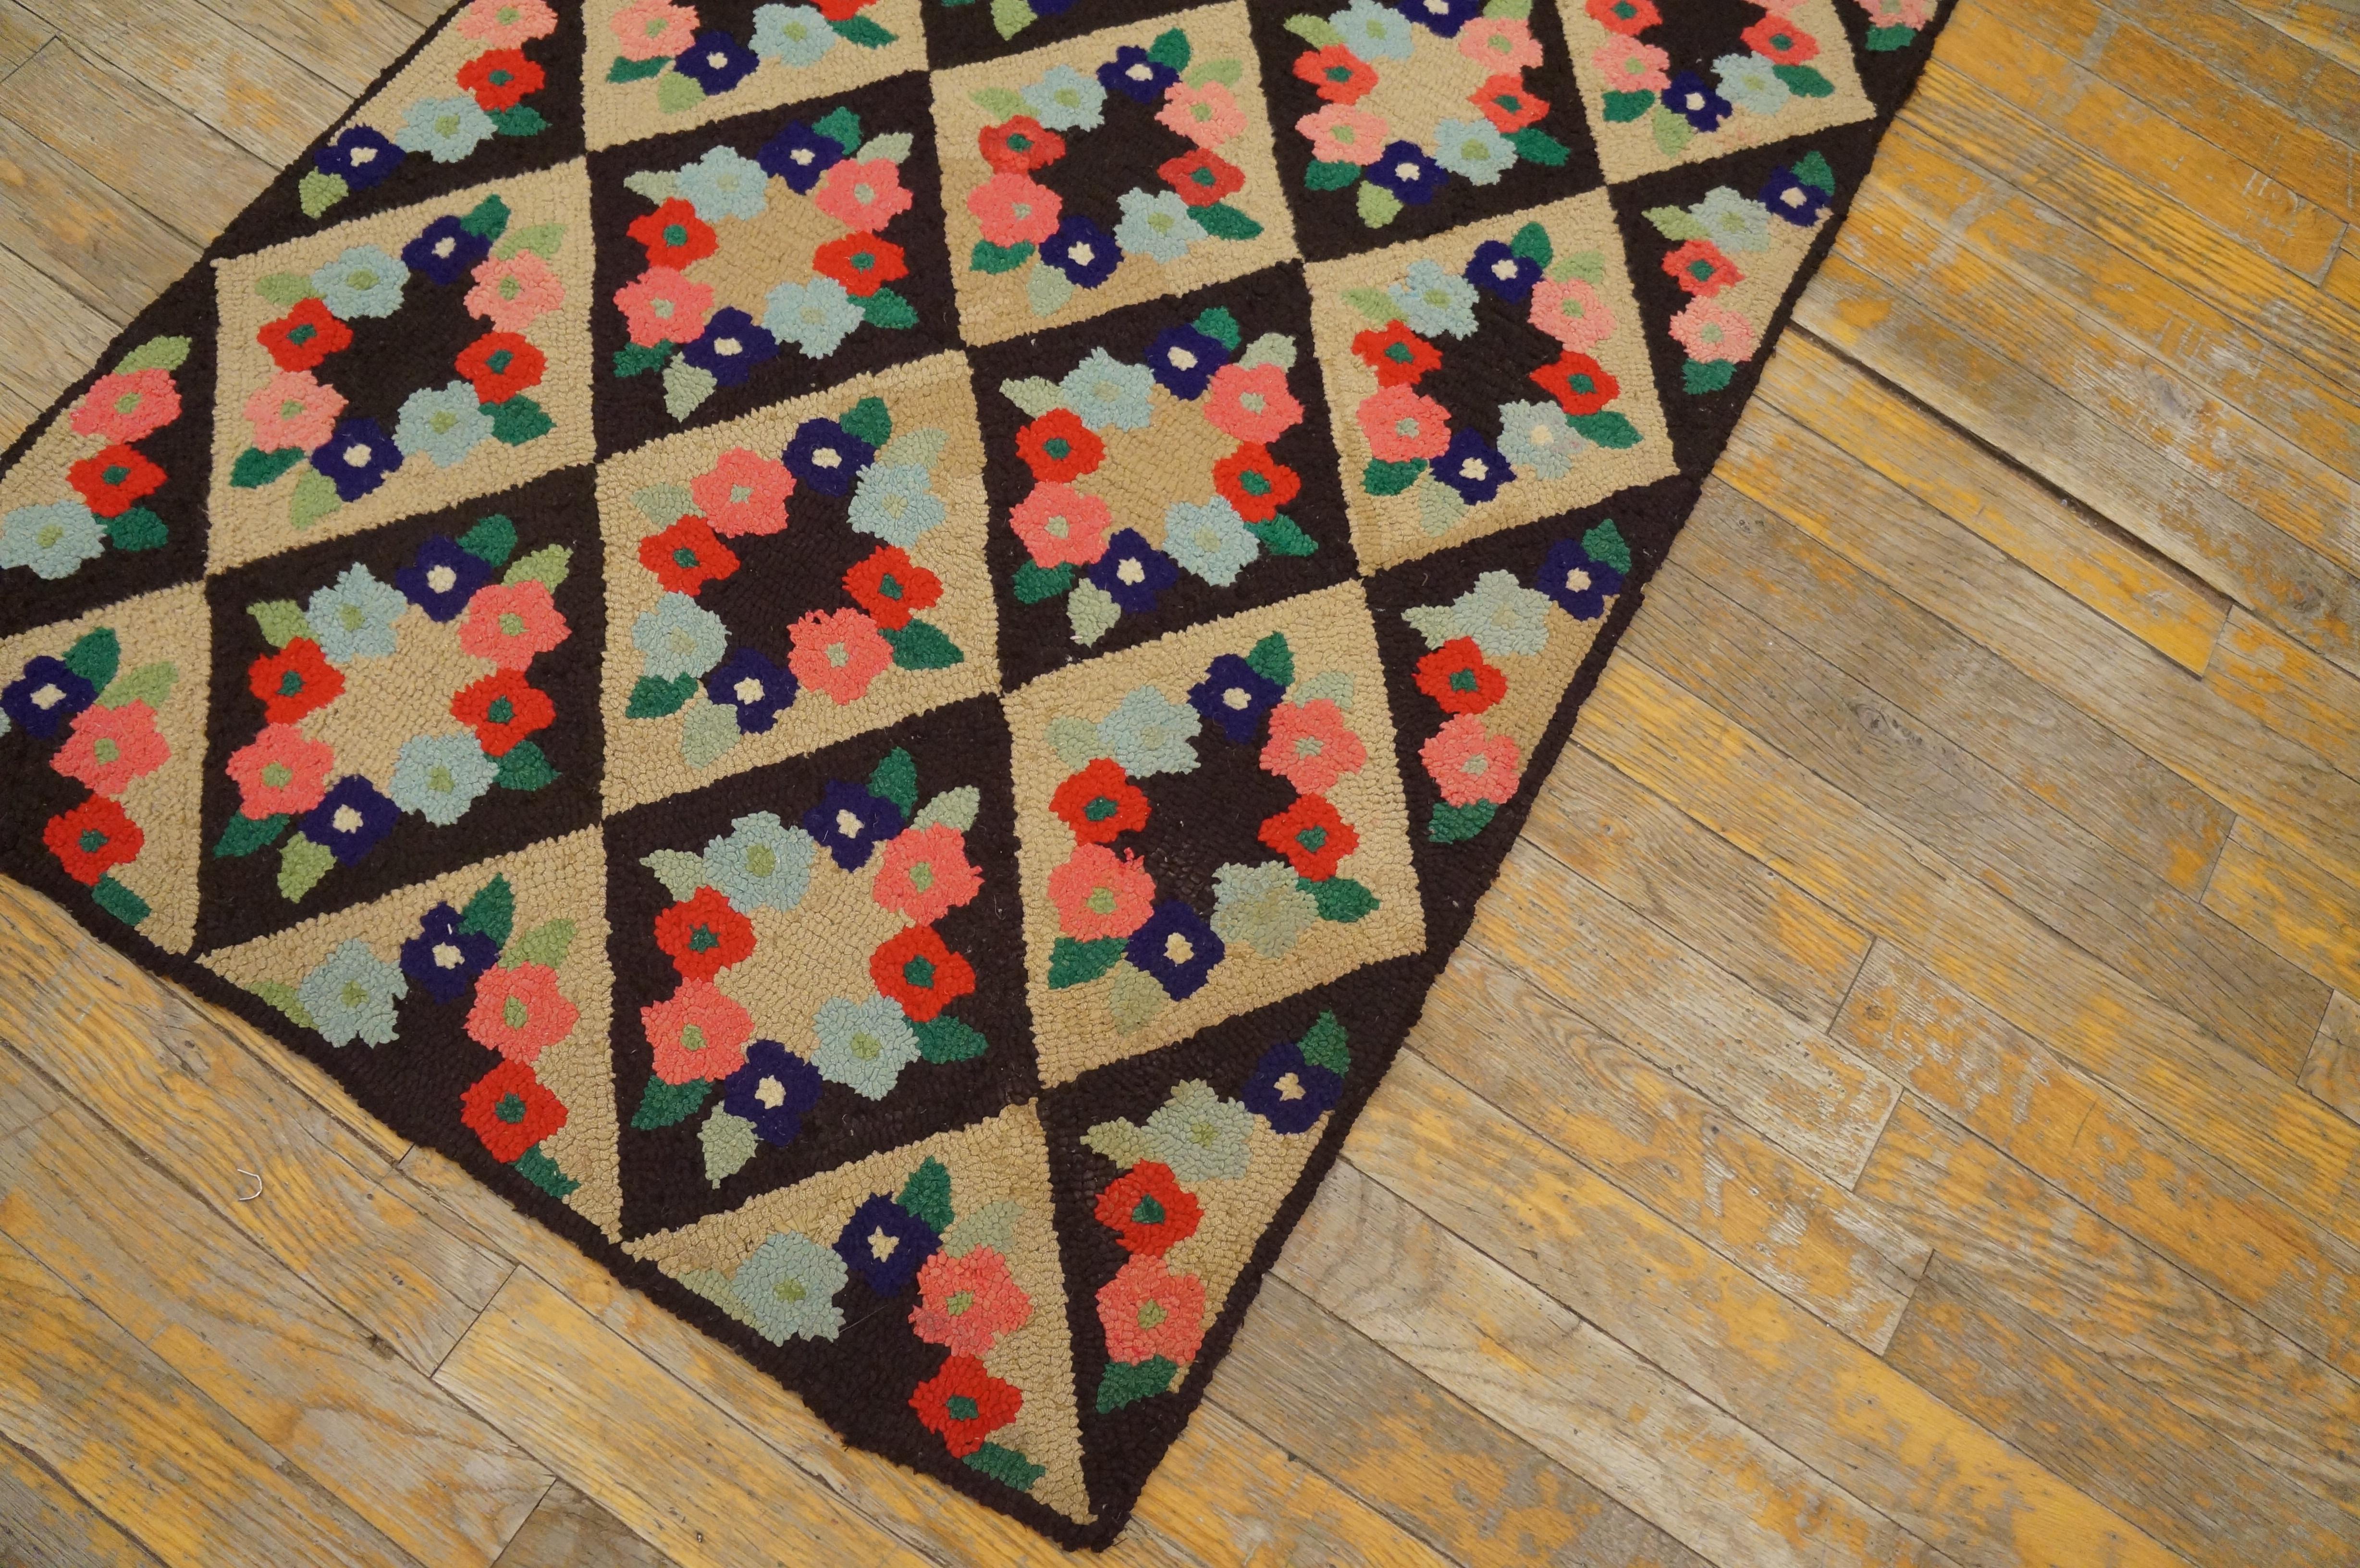 Antique American hooked rug, size: 2'4